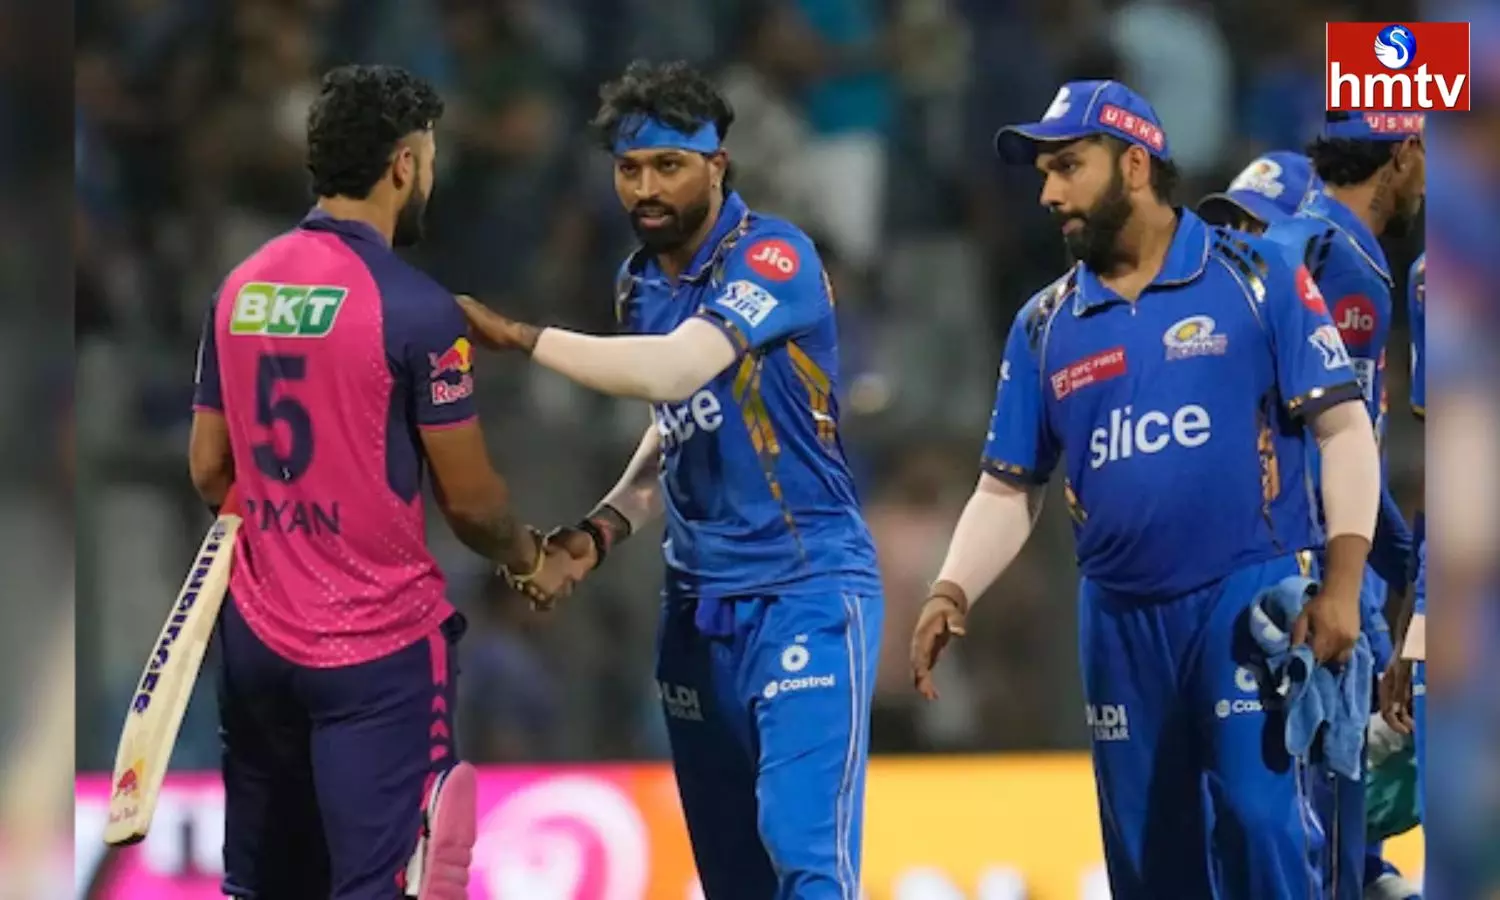 Rajasthan Royals won by 6 wickets against Mumbai Indians